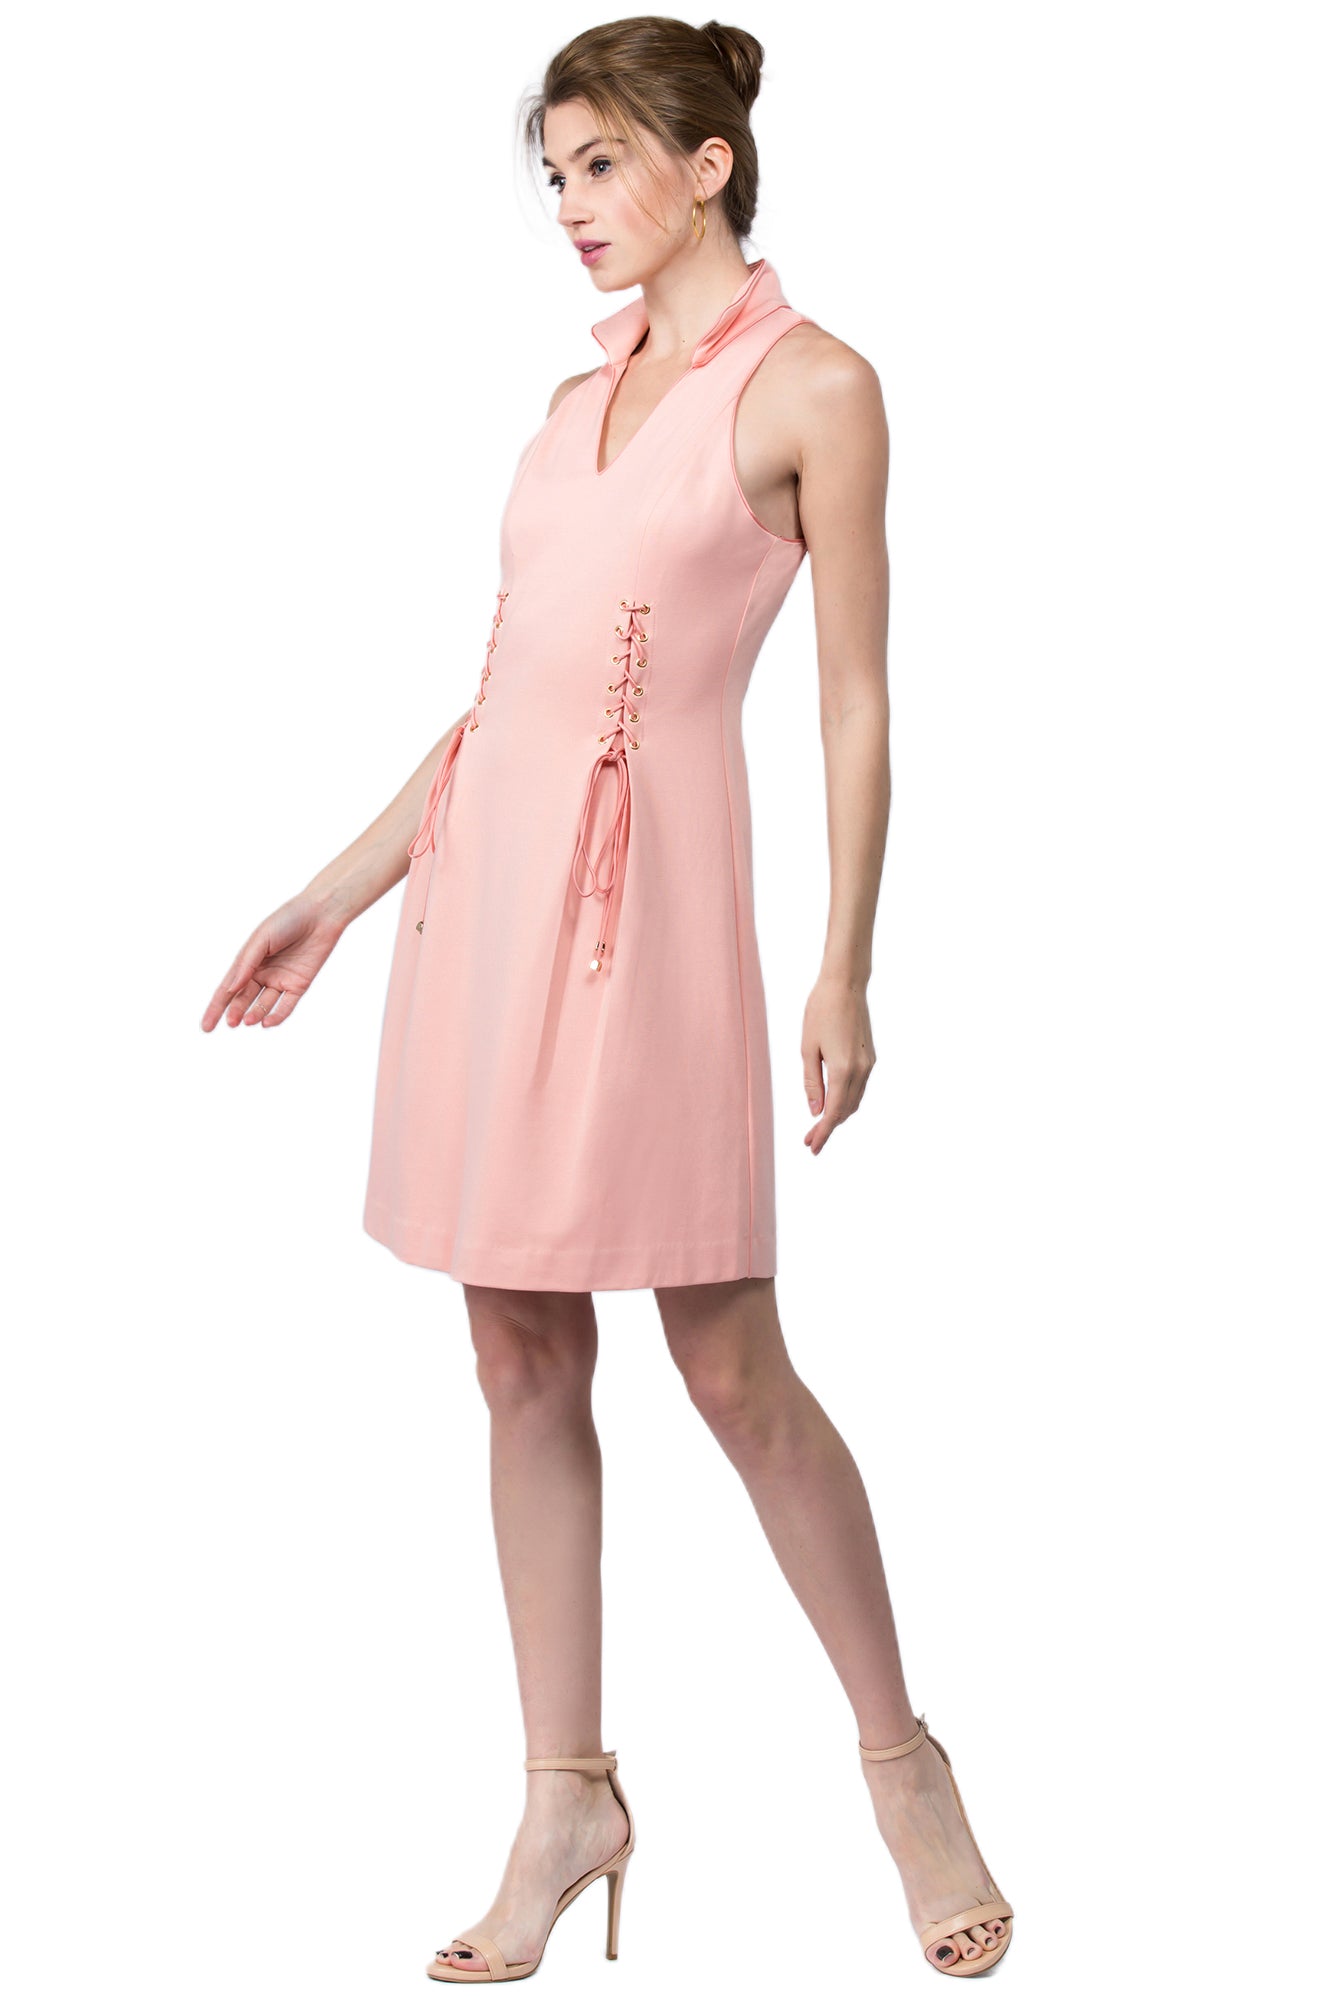 3/4 front view of model wearing sleeveless racer neck peachy pink short fit and flare wing tip collar dress with corset lace up ties at front waist.